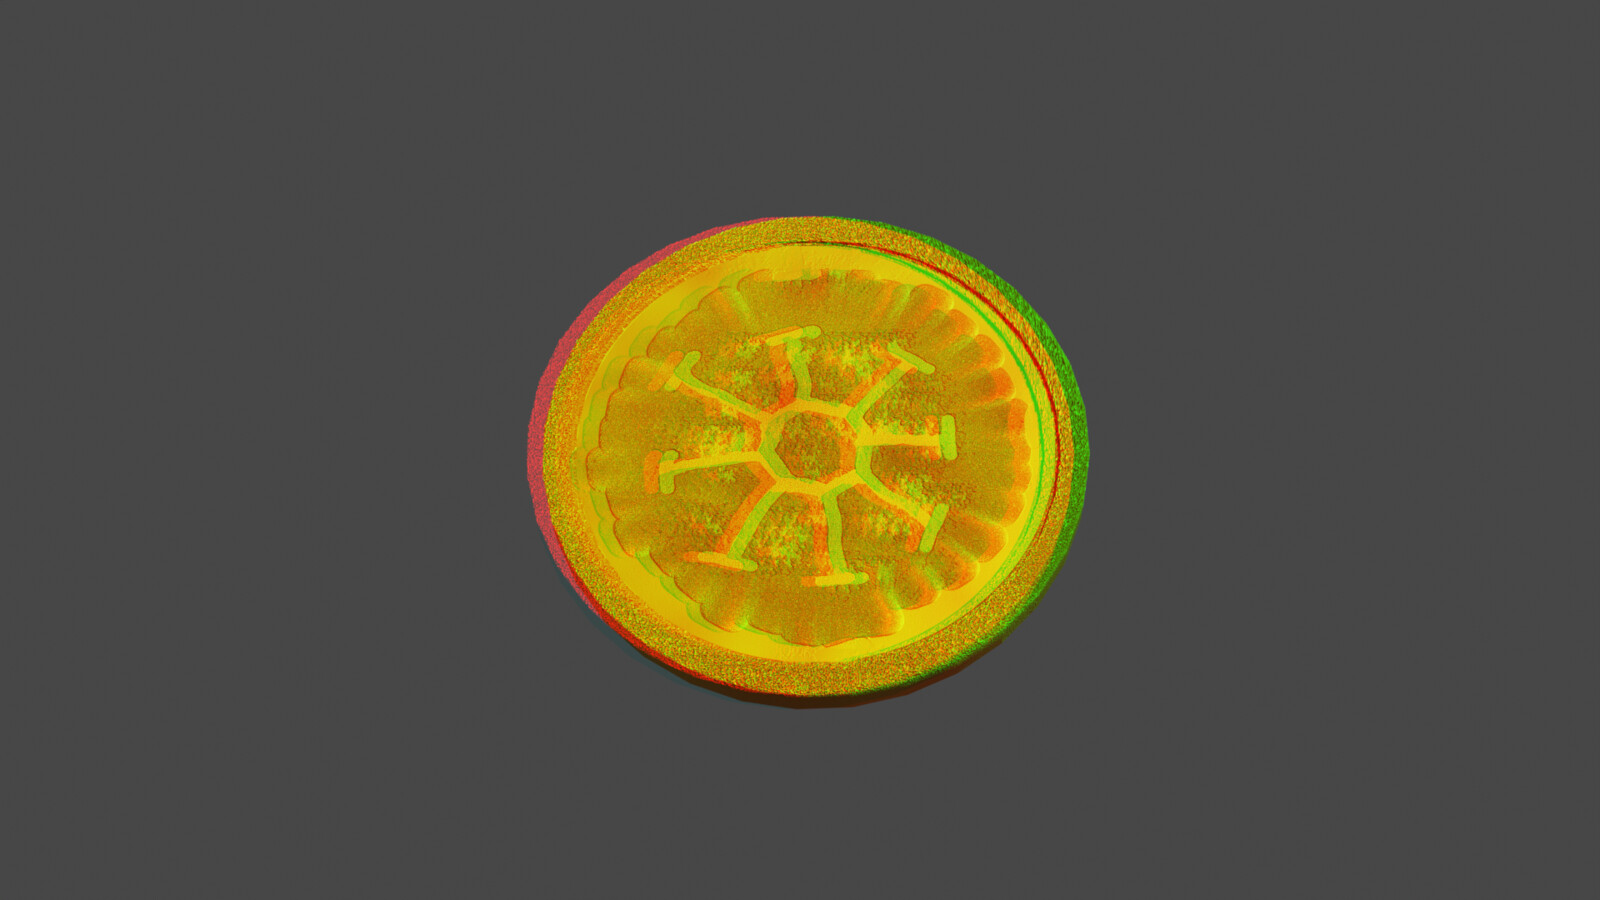 The same coin in anaglyphic 20x scale. I almost added EUrion but it's complicated enough, I think. I added some scuffing to the outer edge, which may also work with the Elder Sign coin... I'll have to check.